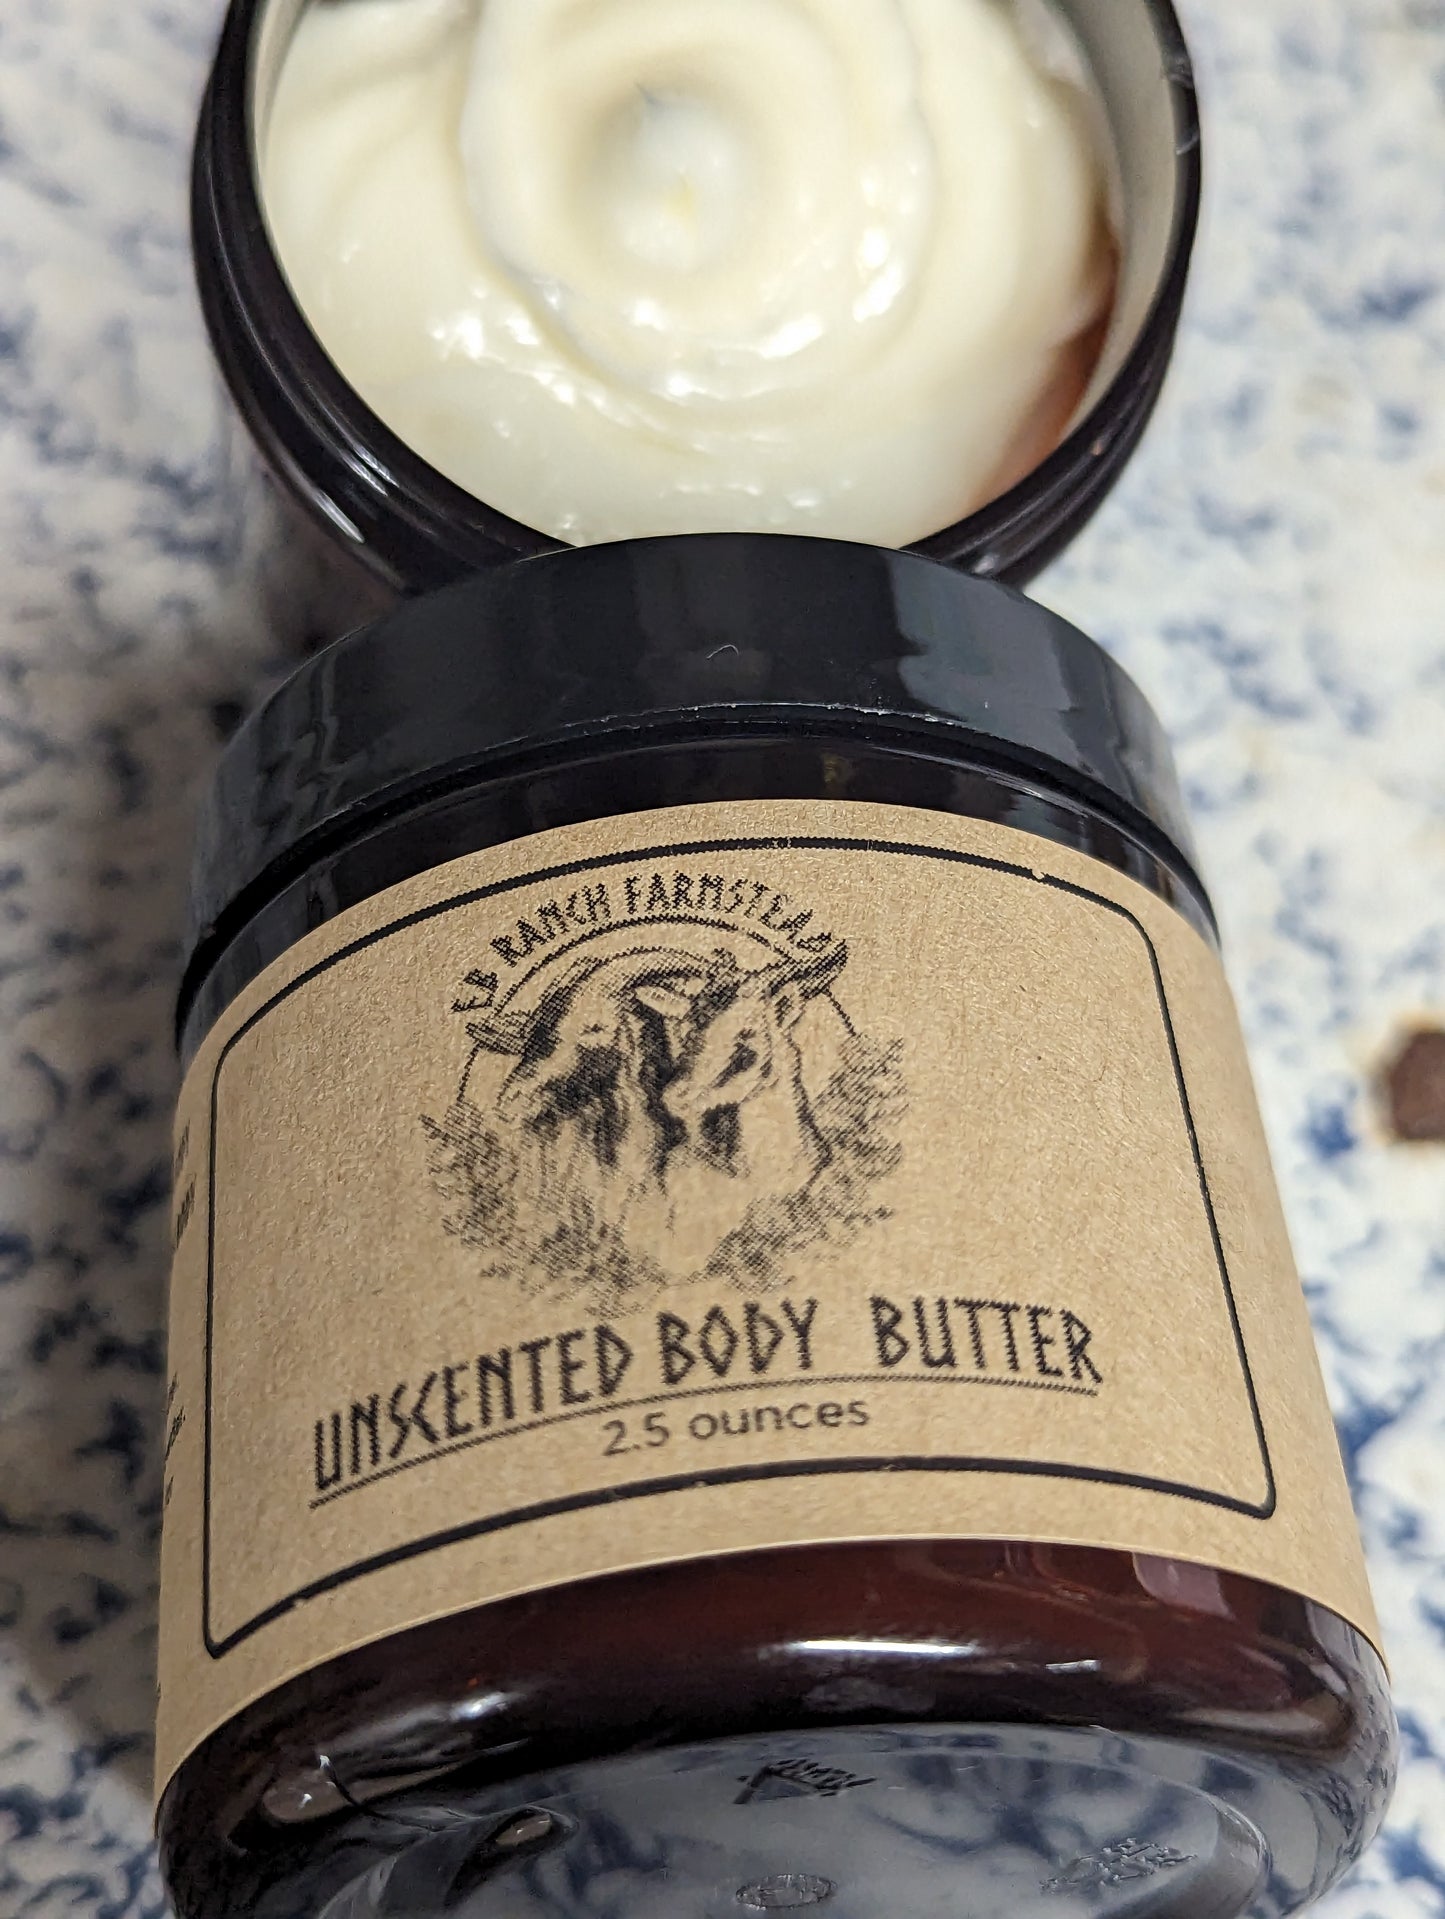 whipped body butter, sustainable body products, all natural body butter, all natural body products, body butter near me, simple body care, sustainable body care, 